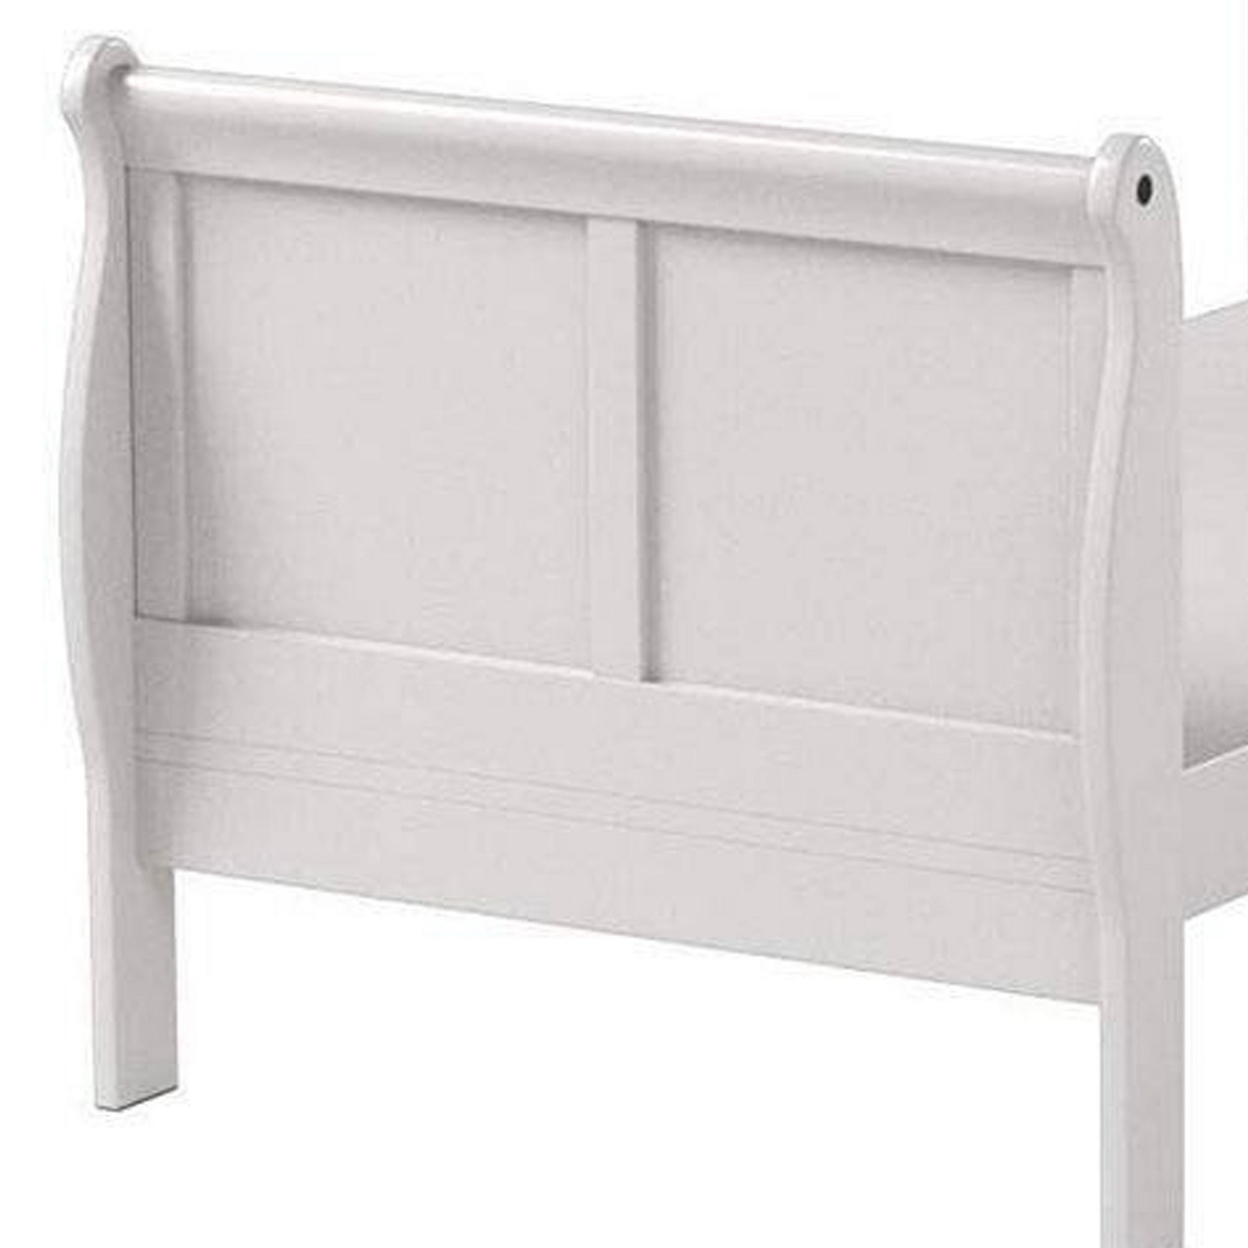 Sophisticated Contemporary Style Twin Size Sleigh Bed, White- Saltoro Sherpi